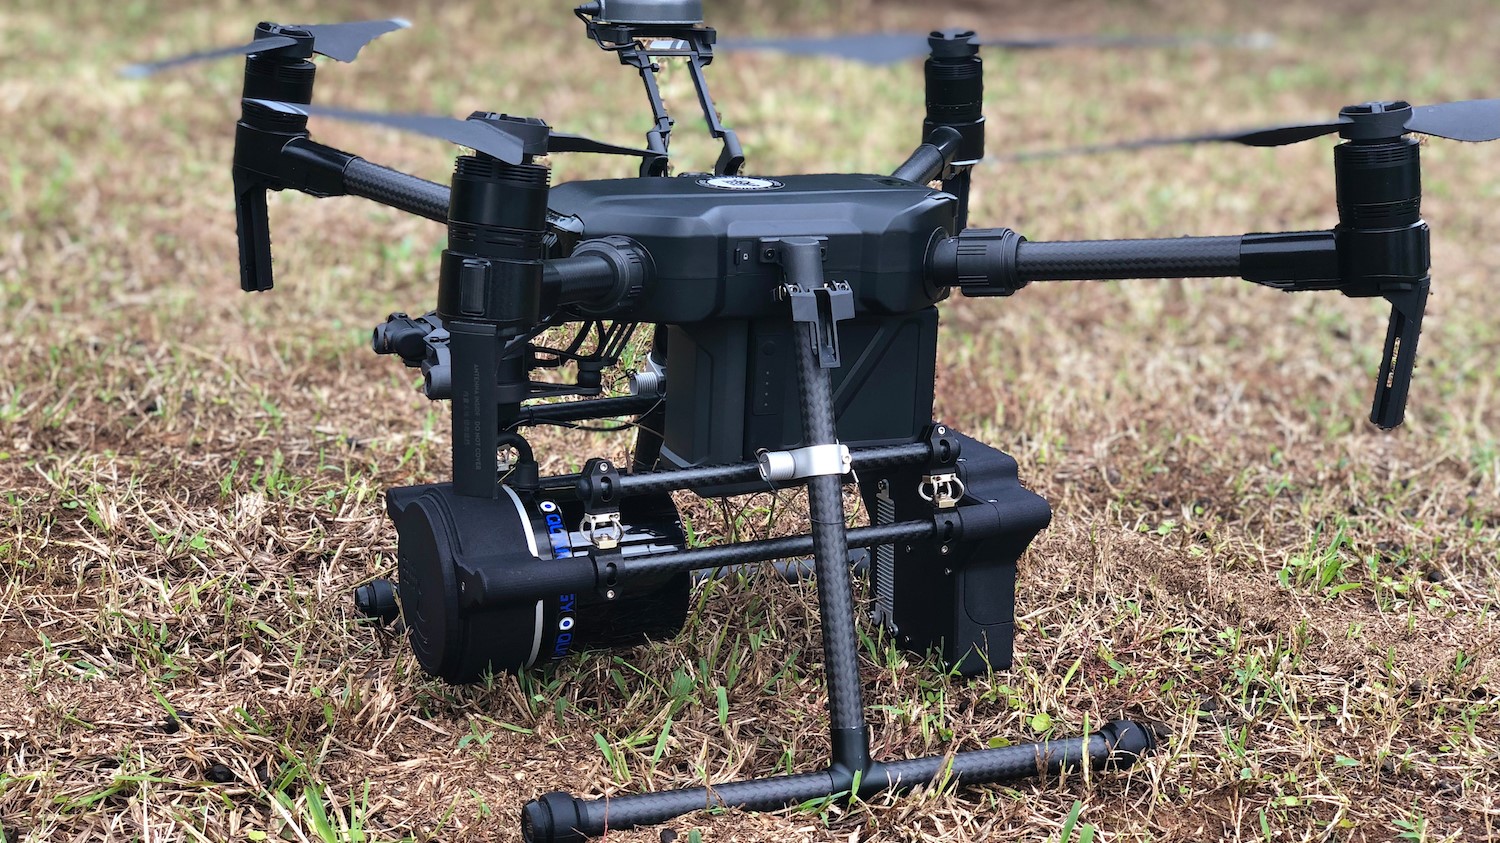 Quanergy M8 LiDAR mounted on a drone